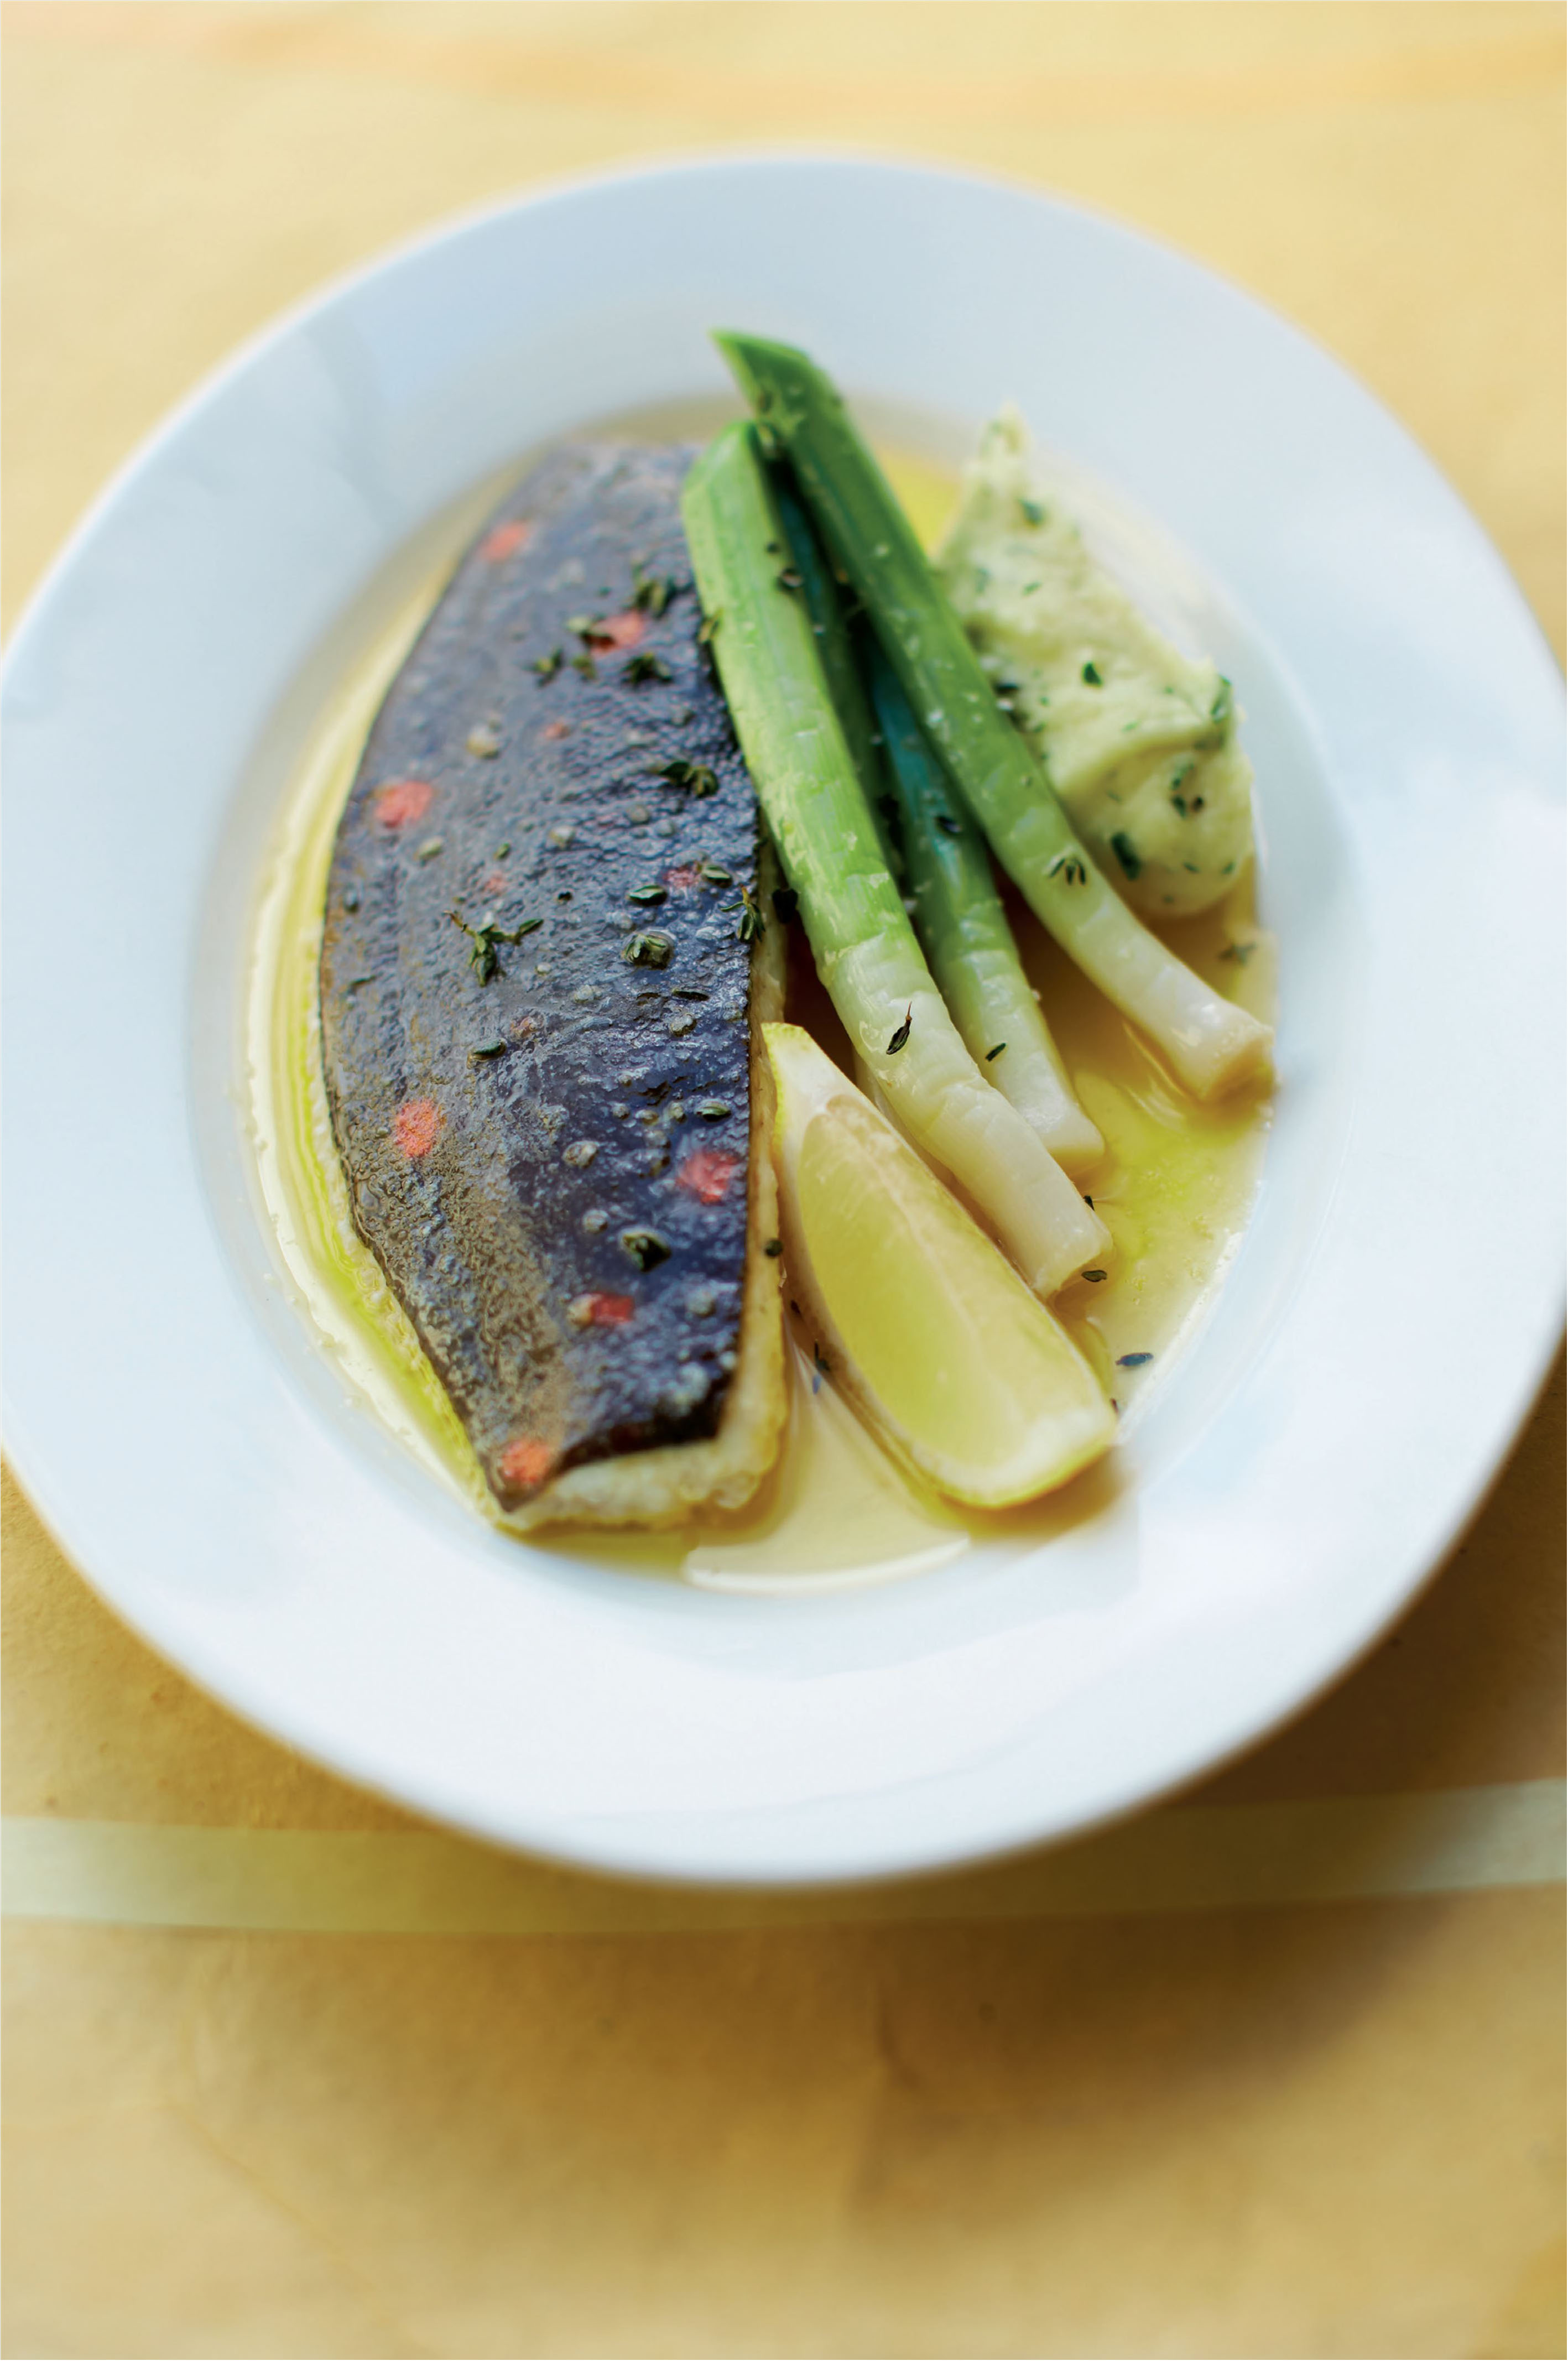 Plaice poached in butter with leeks, and parsley and mustard mash